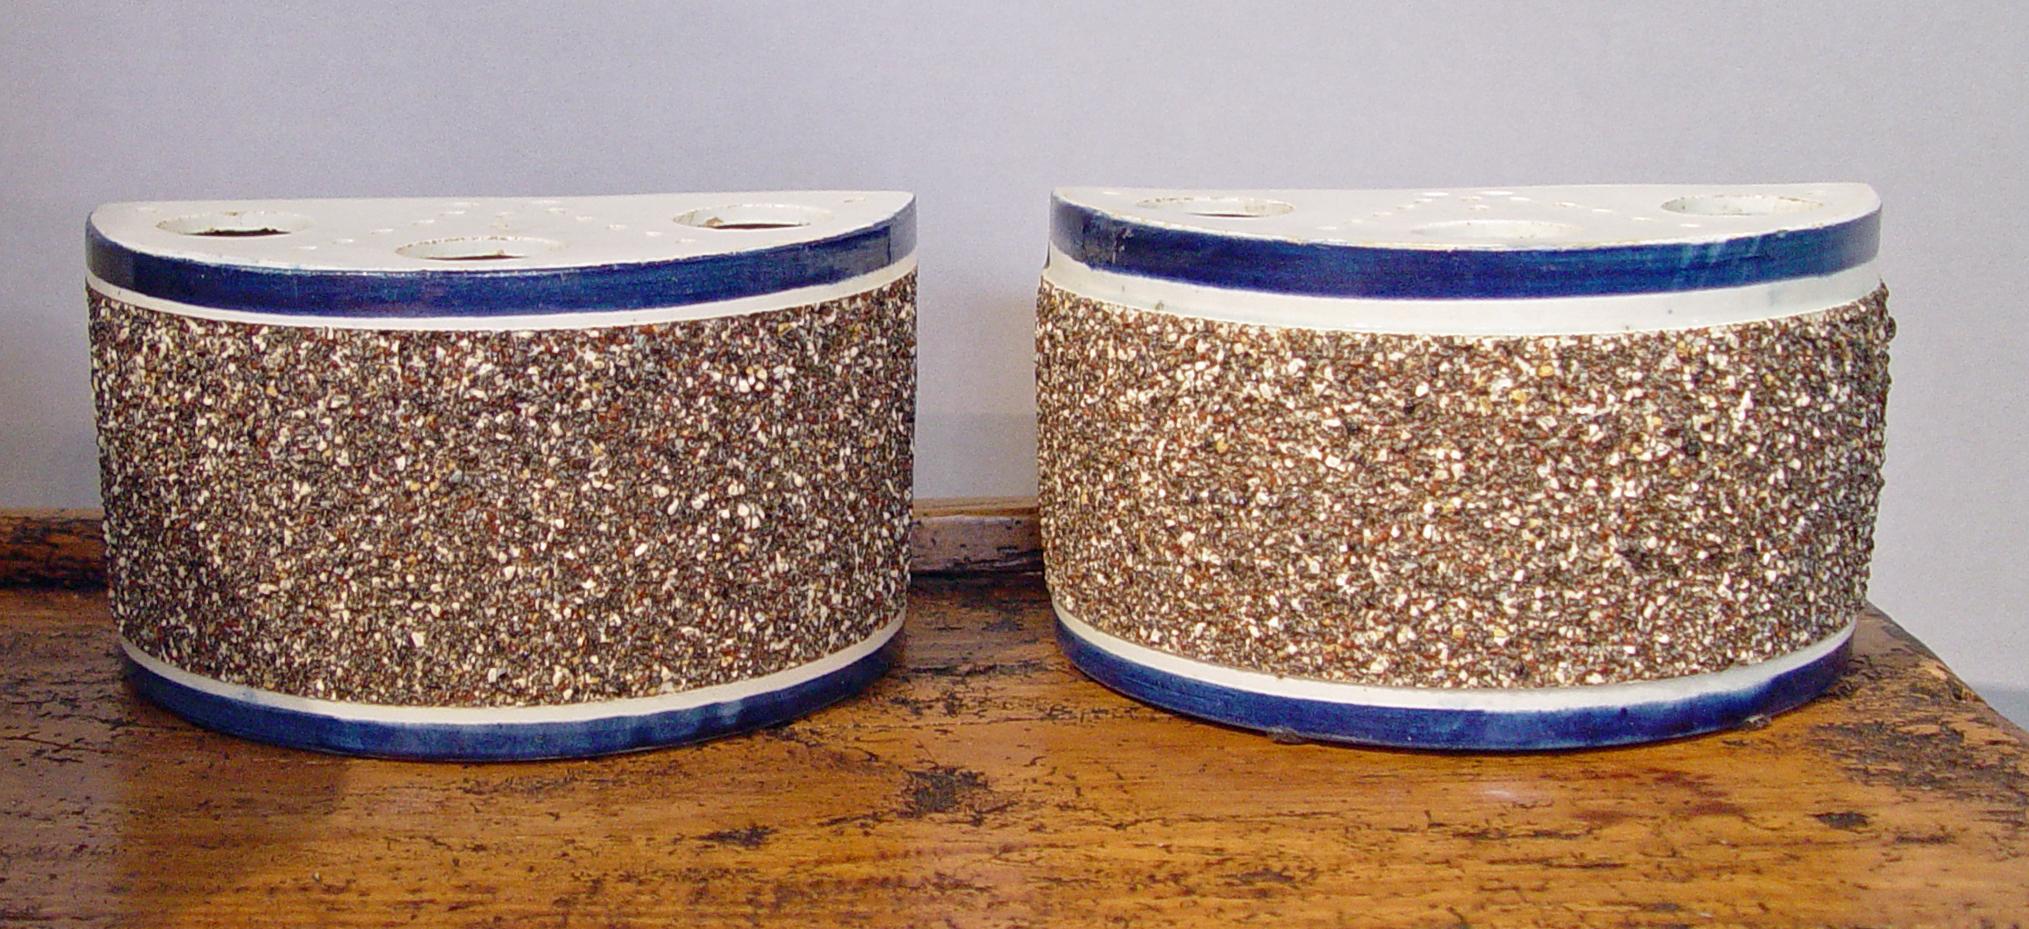 The pair of bough pots have a fixed pierced top with a blue band around the upper rim and the front panel with a pebbled or encrusted finish. The finish was created by applying small chips of crushed clay. These were designed to be displayed side by